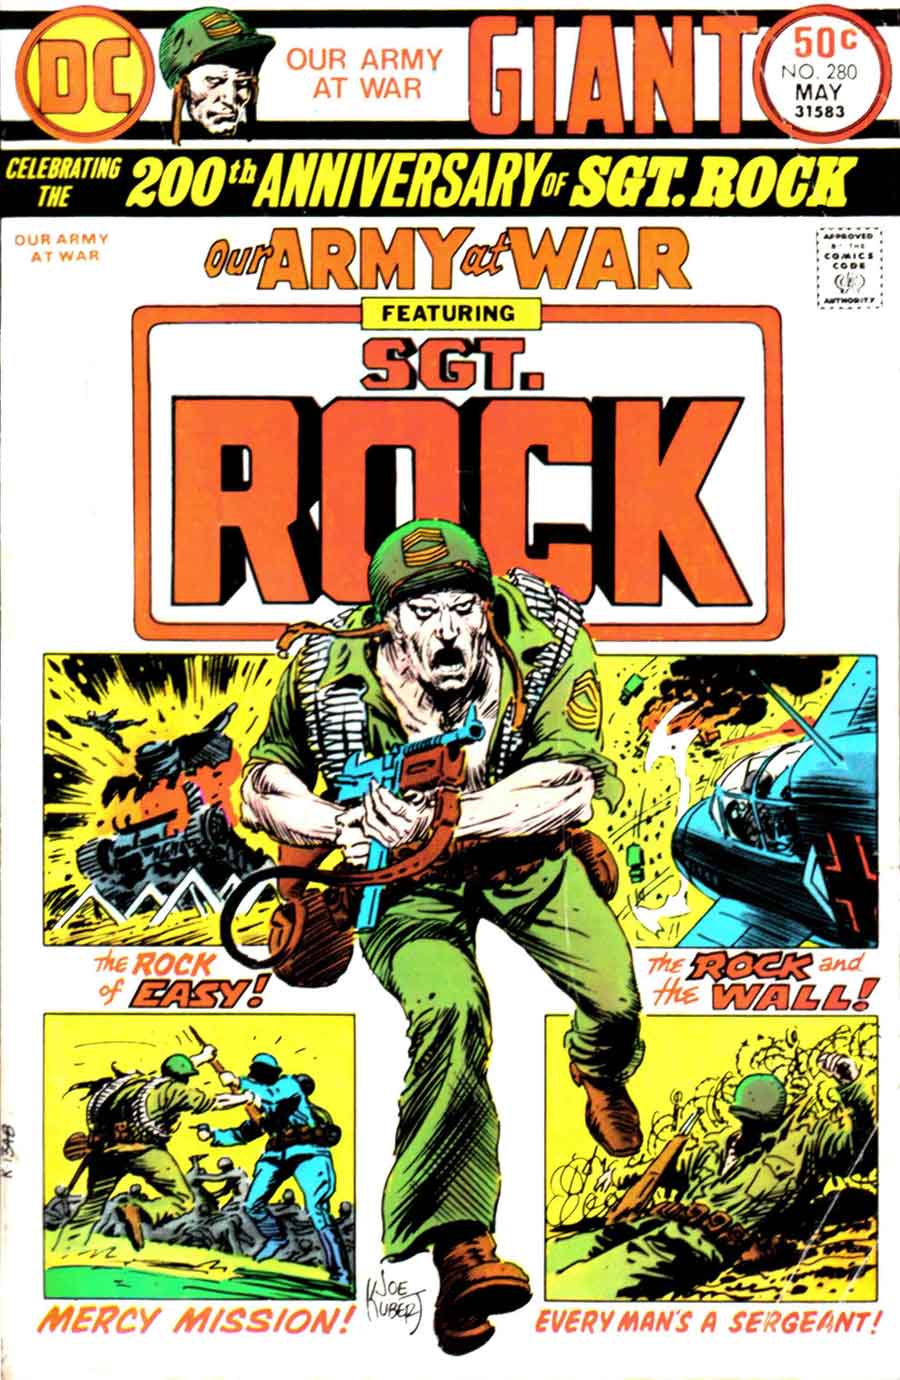 Our Army at War #280 dc bronze age cover art by Joe Kubert